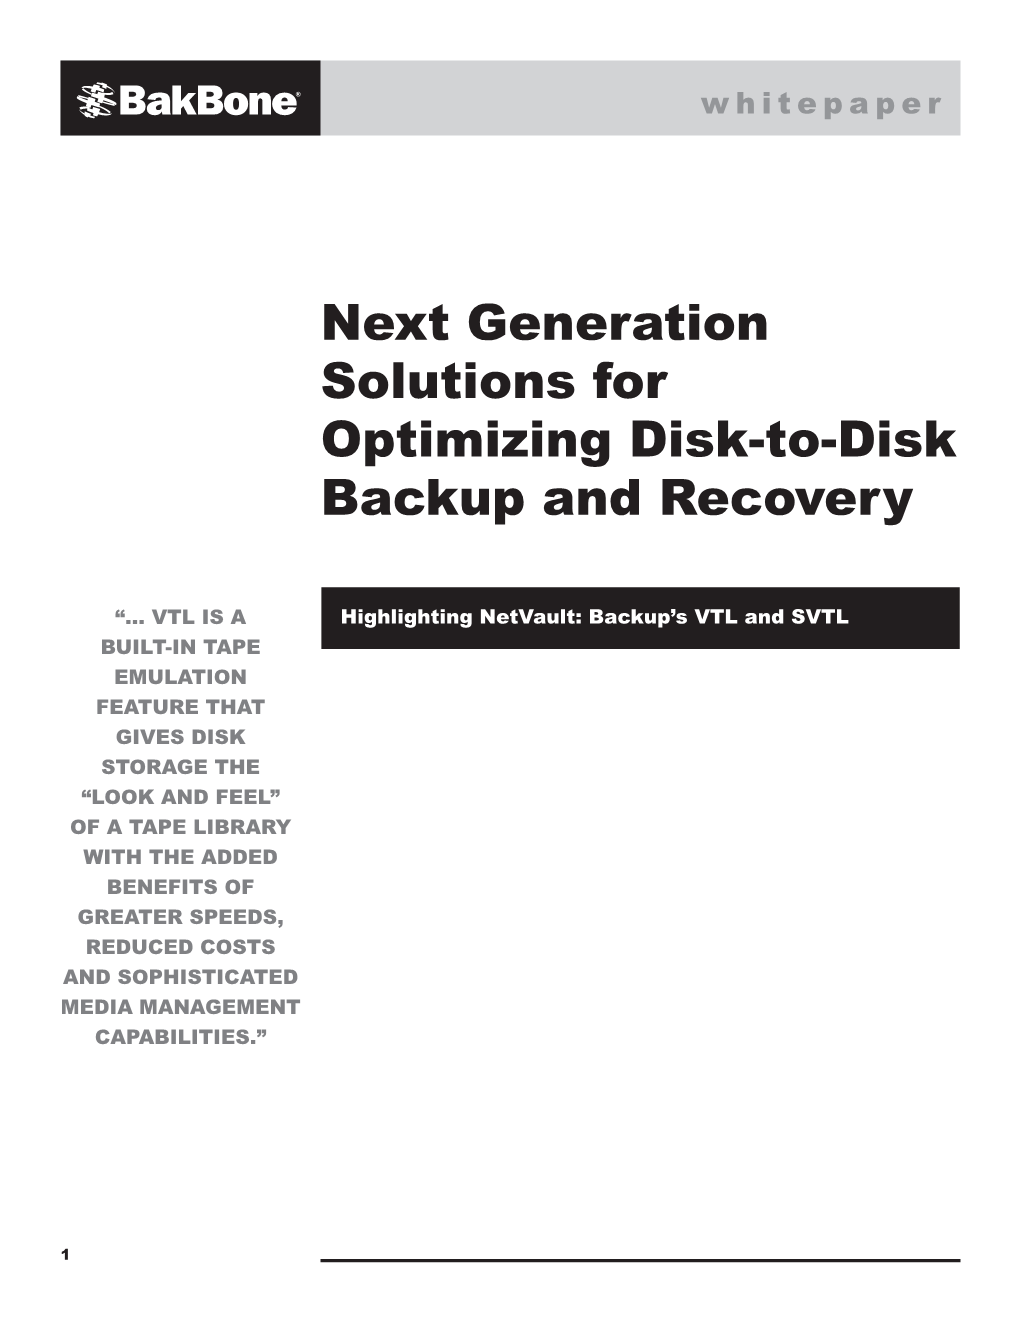 Next Generation Solutions for Optimizing Disk-To-Disk Backup and Recovery Highlightingw Netvault: H I Tbackup’S E P VTL a Pand E SVTL R